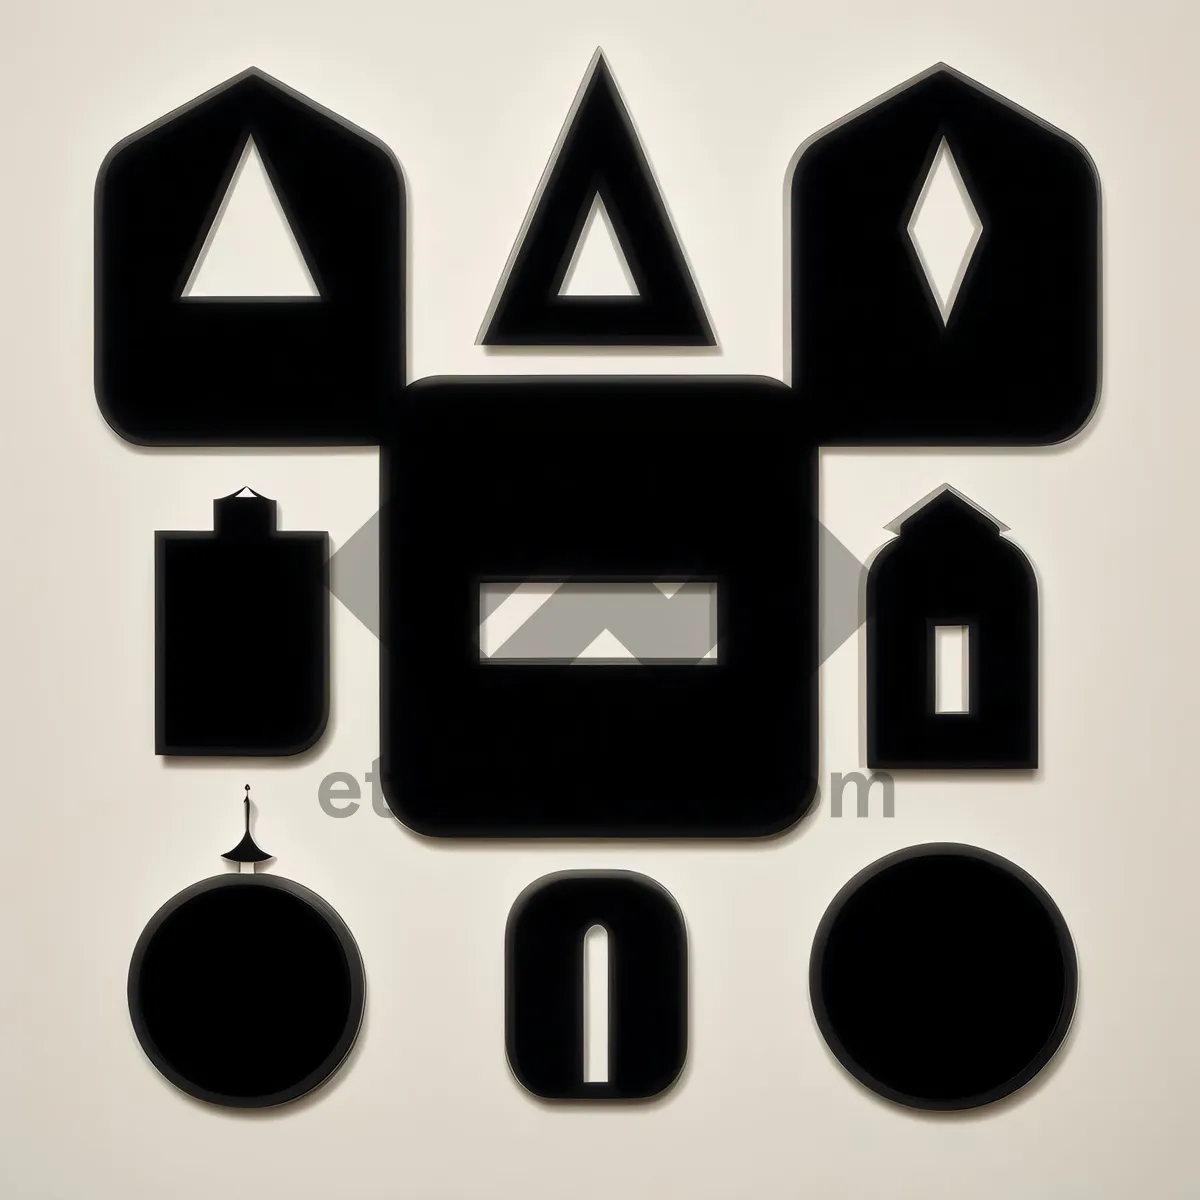 Picture of Black shiny web buttons icon set collection